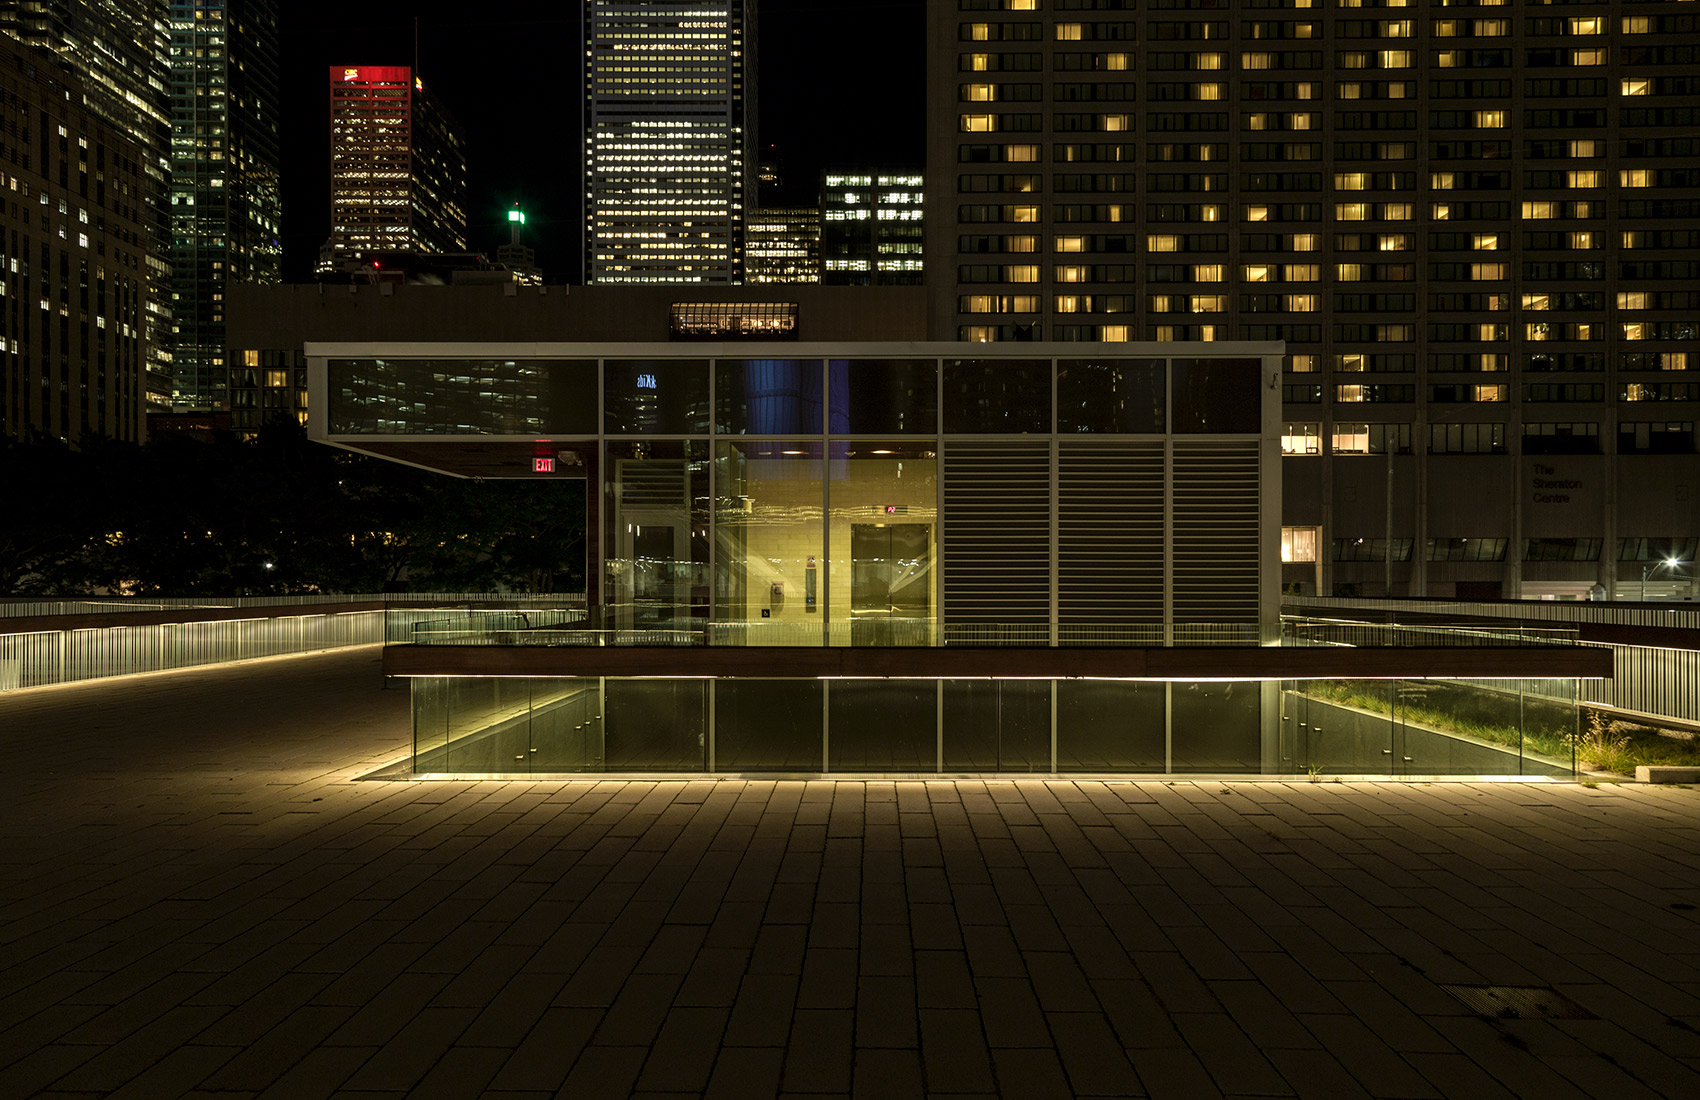 20140923. The clean lines of the entry pavilion rooftop terrace